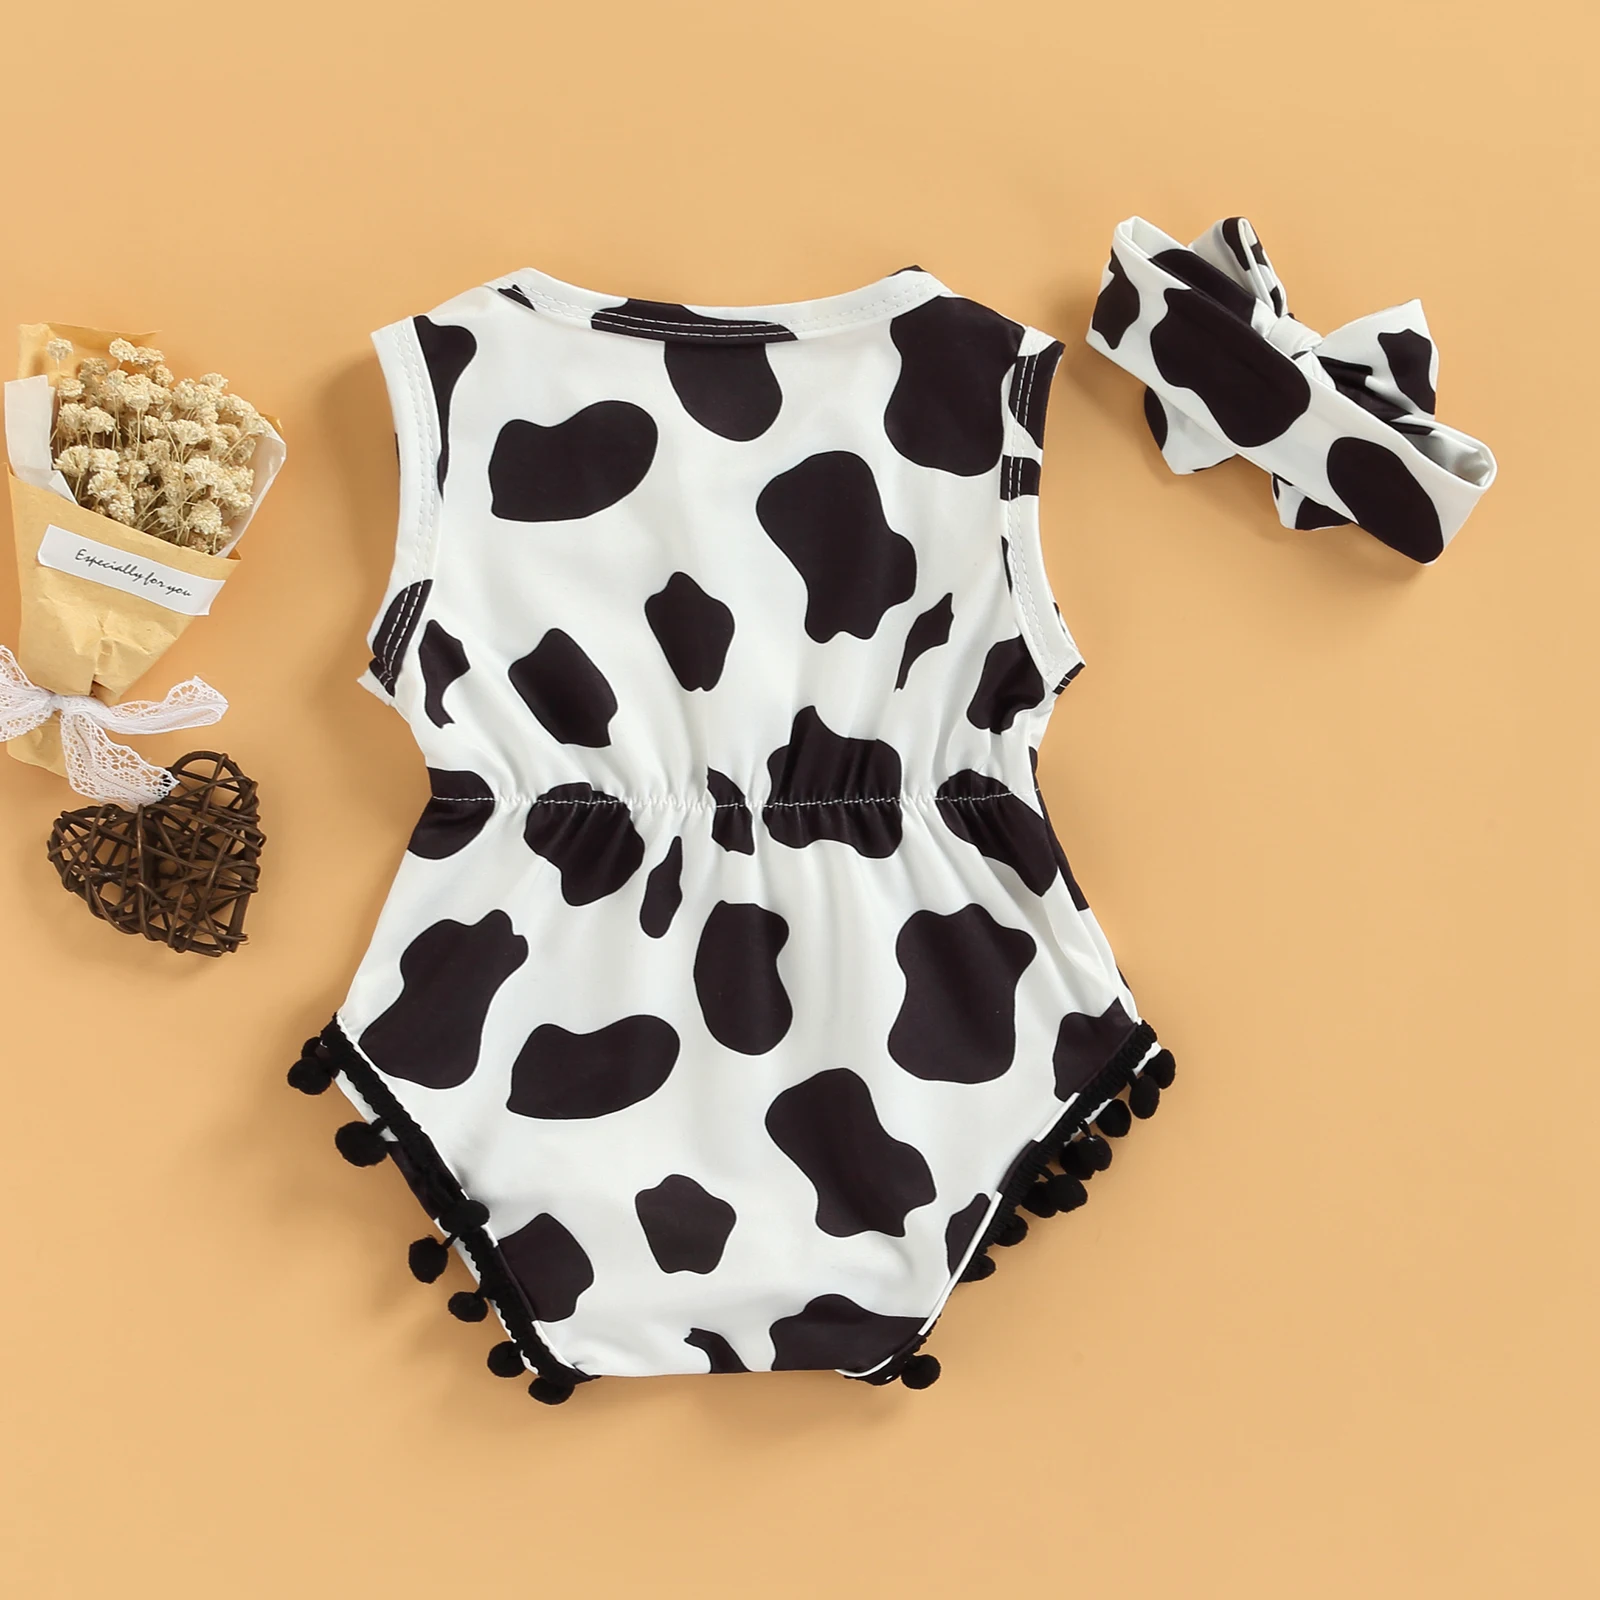 Baby Clothing Set cheap 2Pcs Summer Newborn Baby Cow Print Outfits Toddler Girls Boy Sleeveless Round Neck Tassel Bodysuit+Bow Headband Clothes Suit baby clothes in sets	